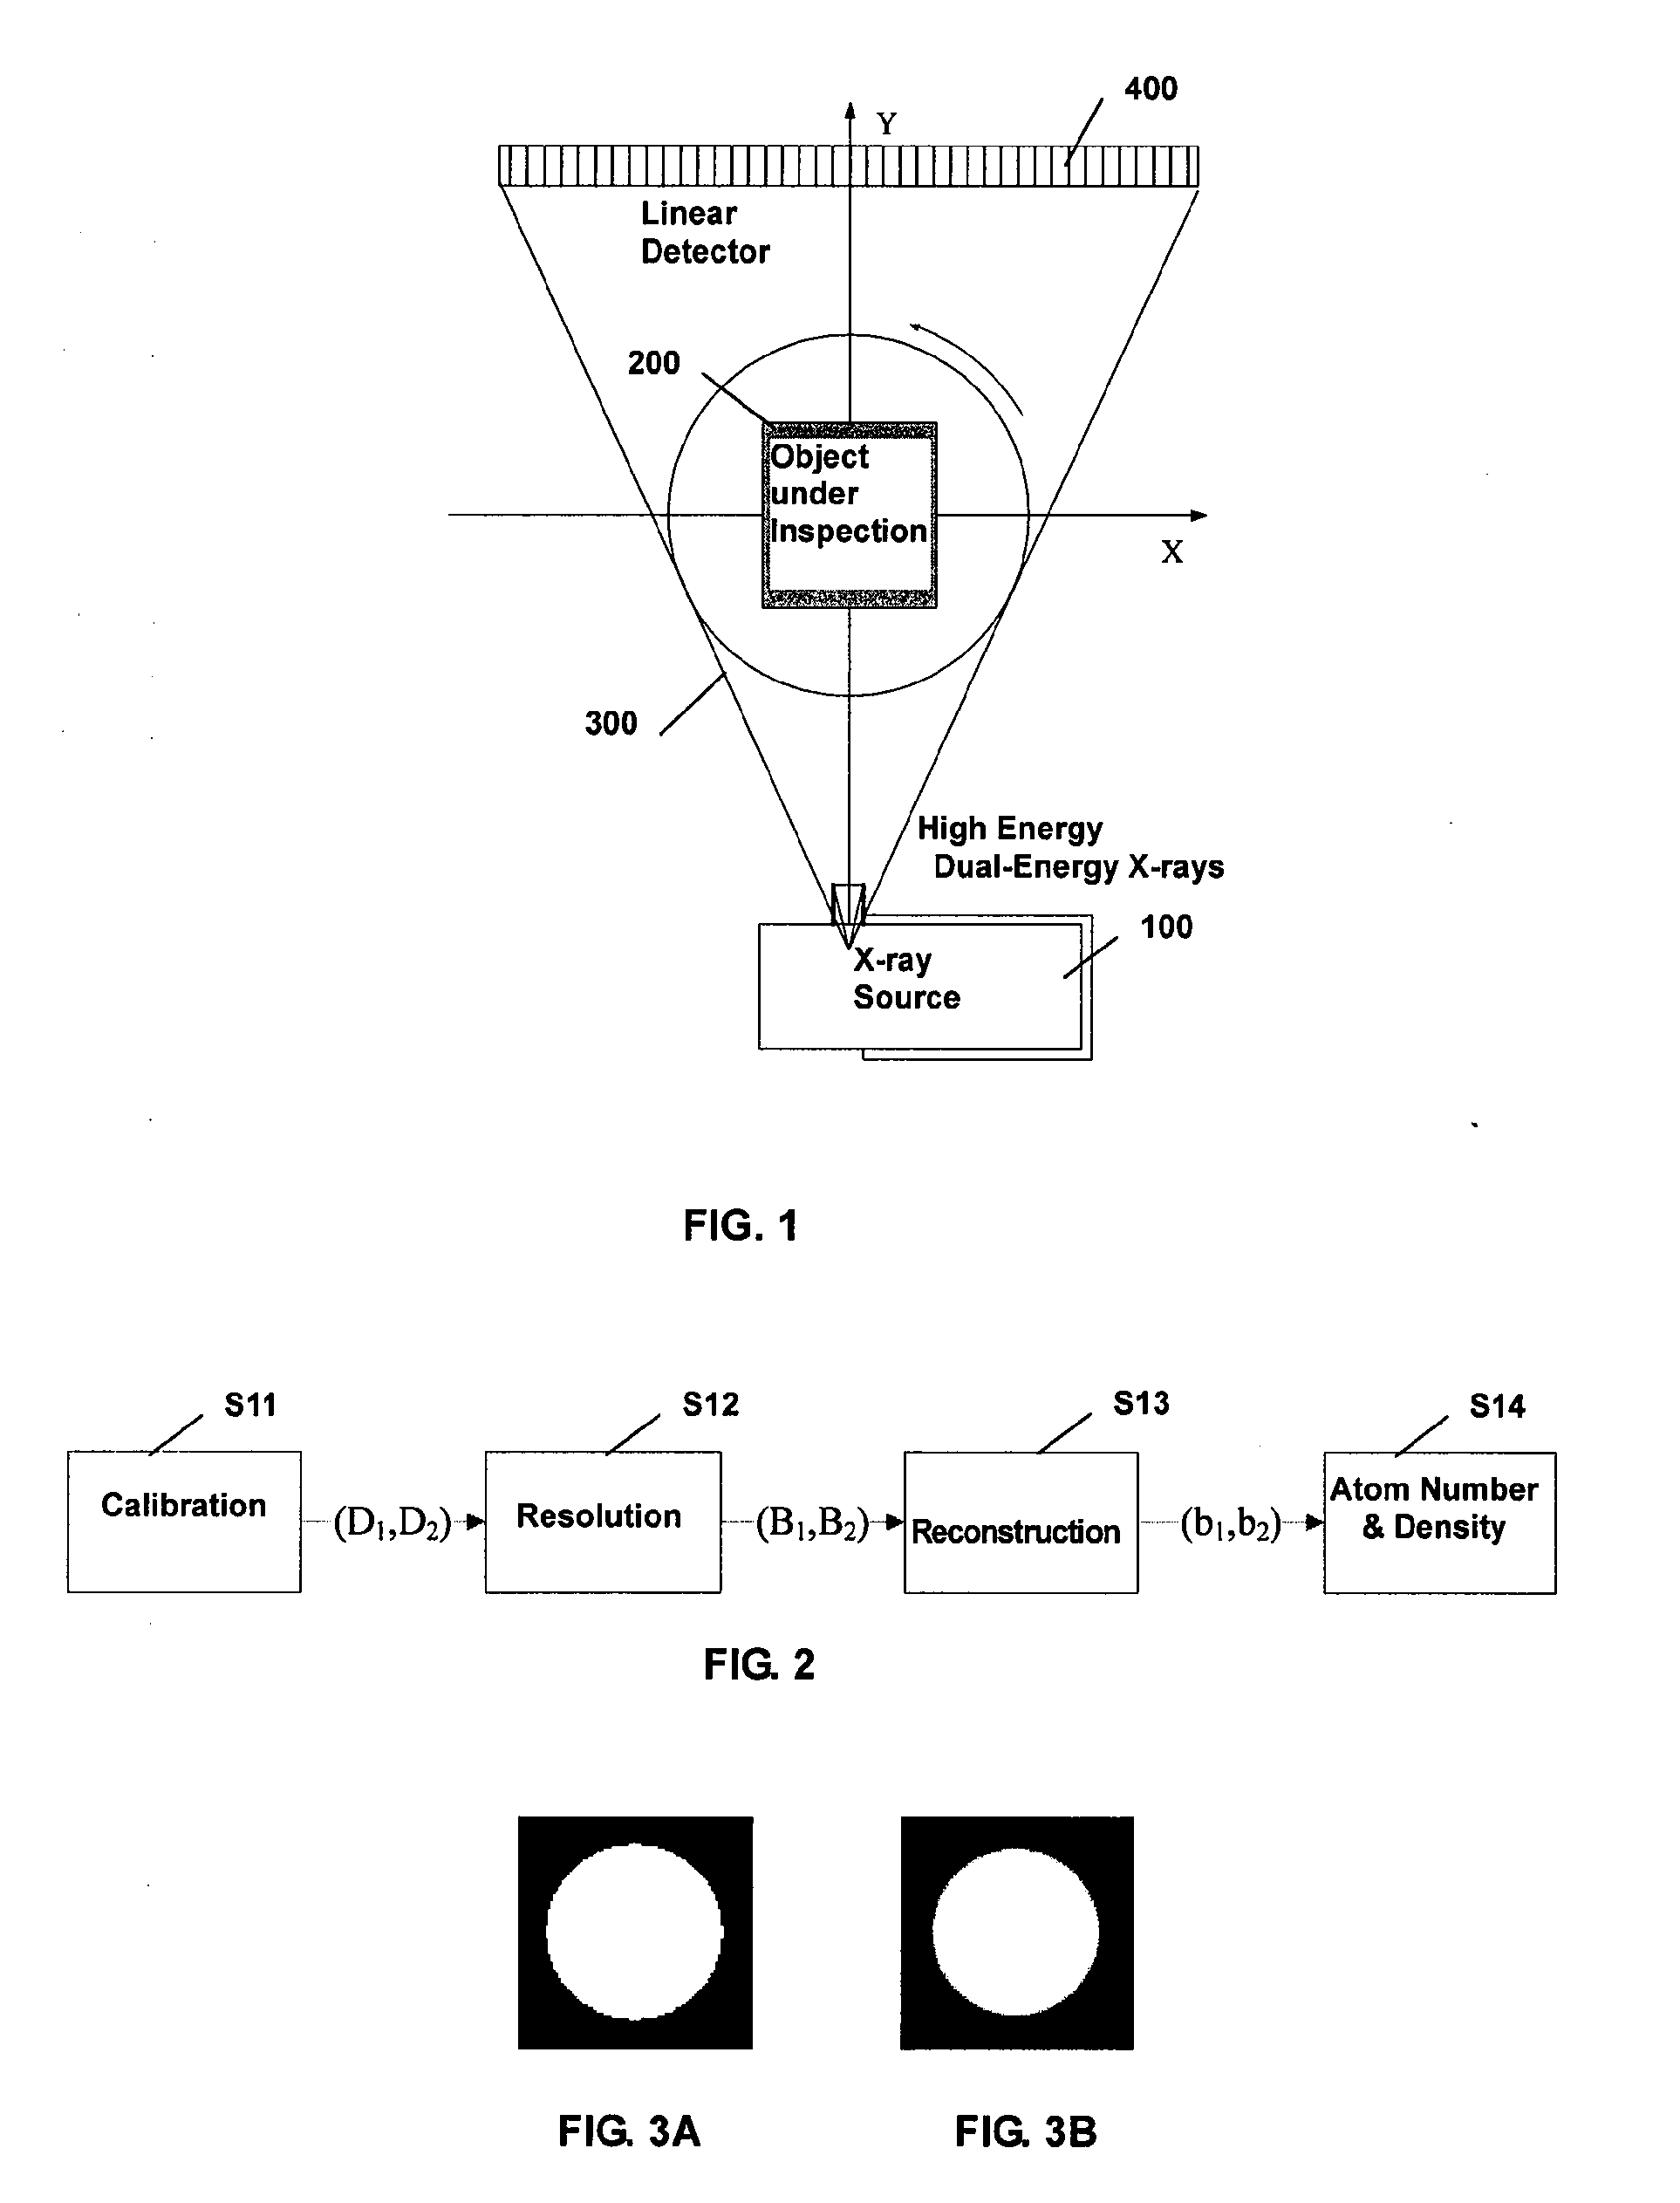 Image reconstruction method for high-energy, dual-energy ct system